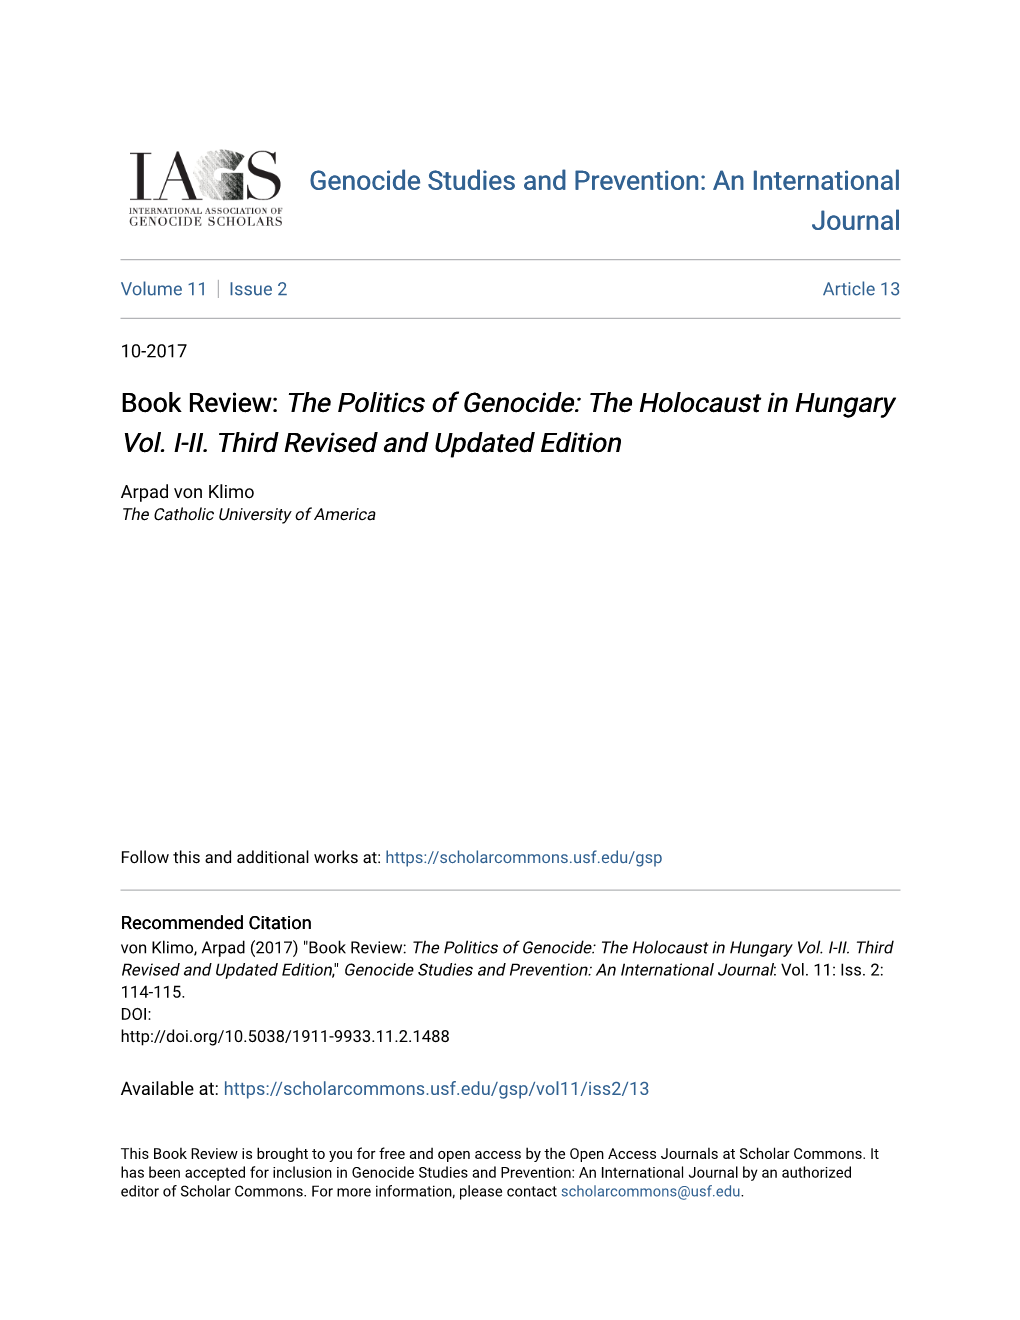 The Politics of Genocide: the Holocaust in Hungary Vol